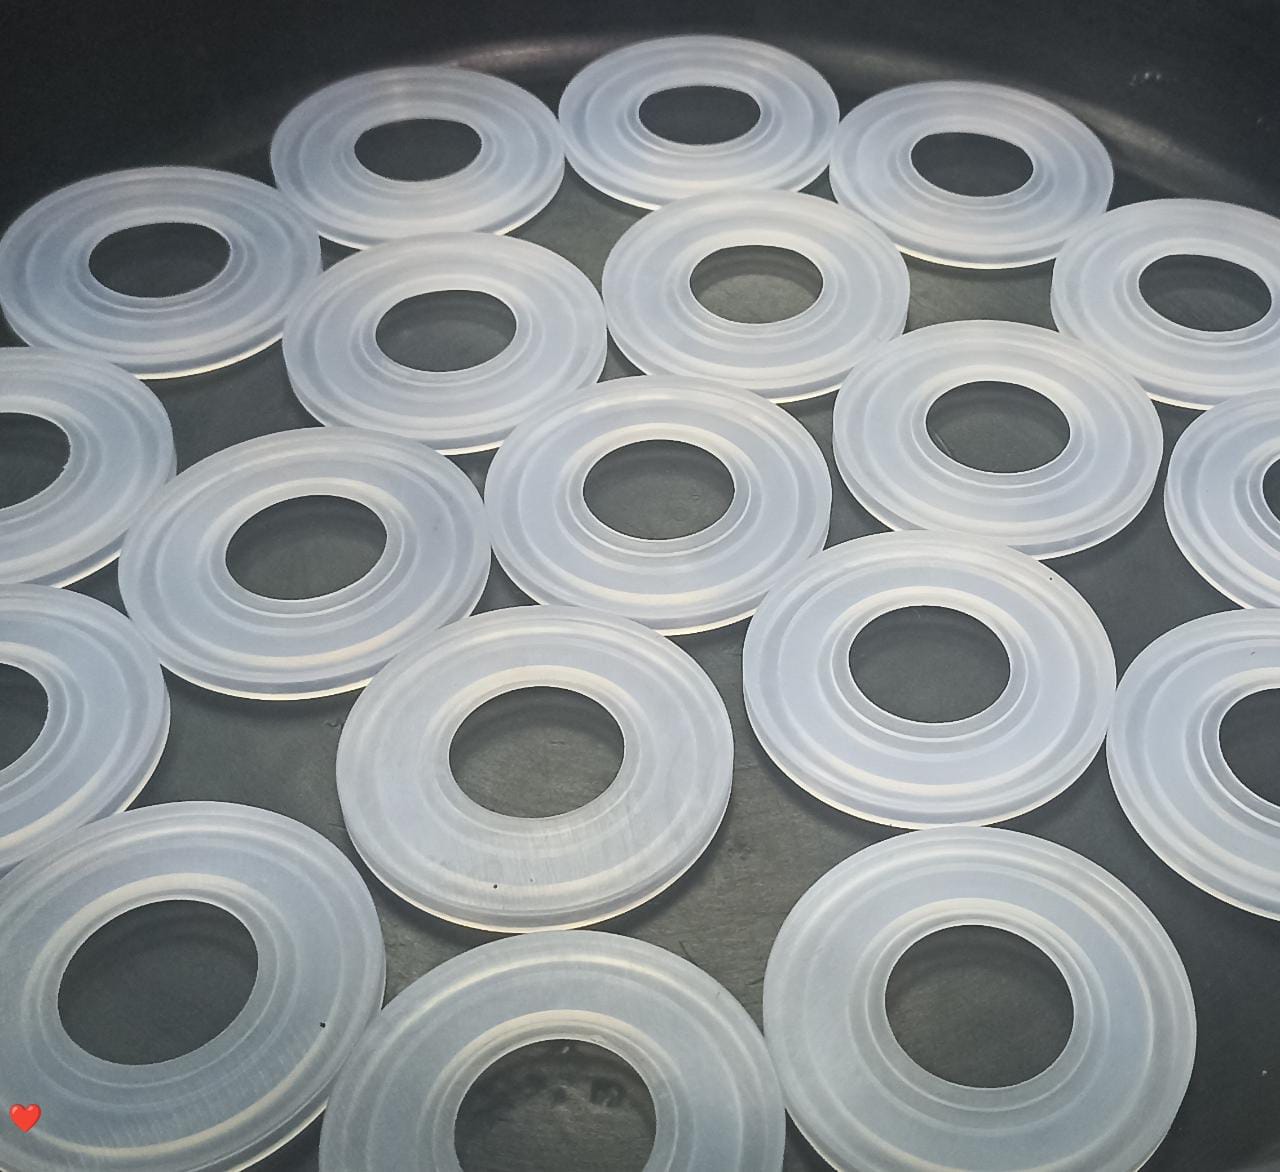 Rubber York Seal O Ring, For Used For Oilseal at Rs 220/pack in Mumbai |  ID: 2851956902730